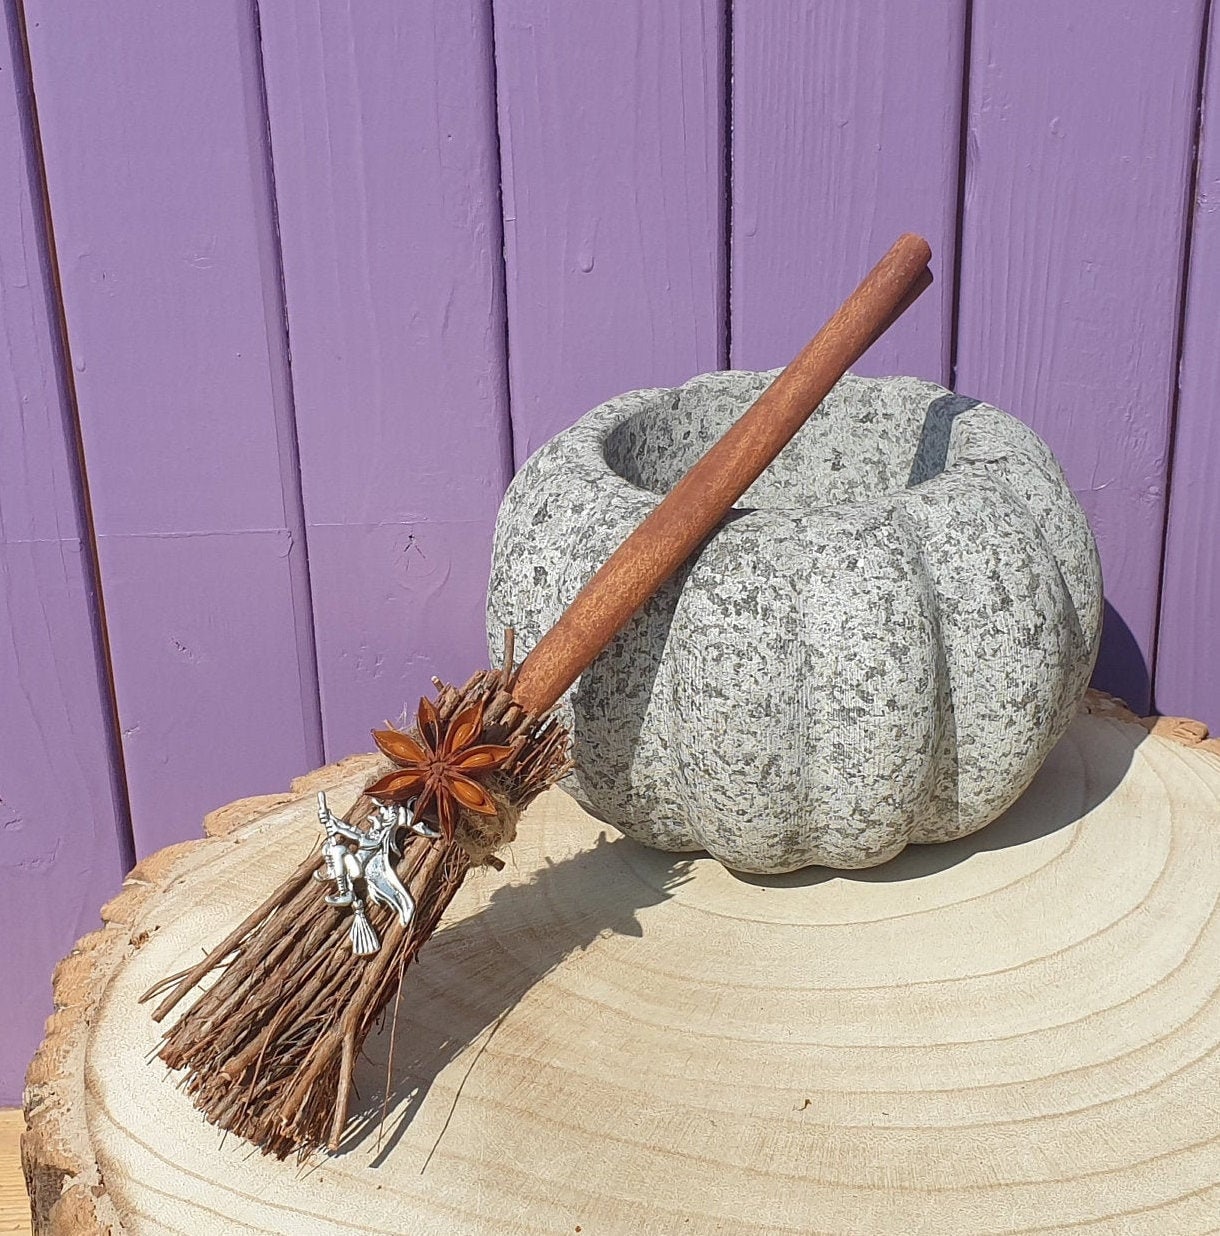 Wiccan Ritual Broom Wall Decor Amethyst Crystal Deco Wicca Brush Handmade Miscanthus Broomstick for Majic Ceremonial OKDOKEY 12.2 Witch Altar Broom 